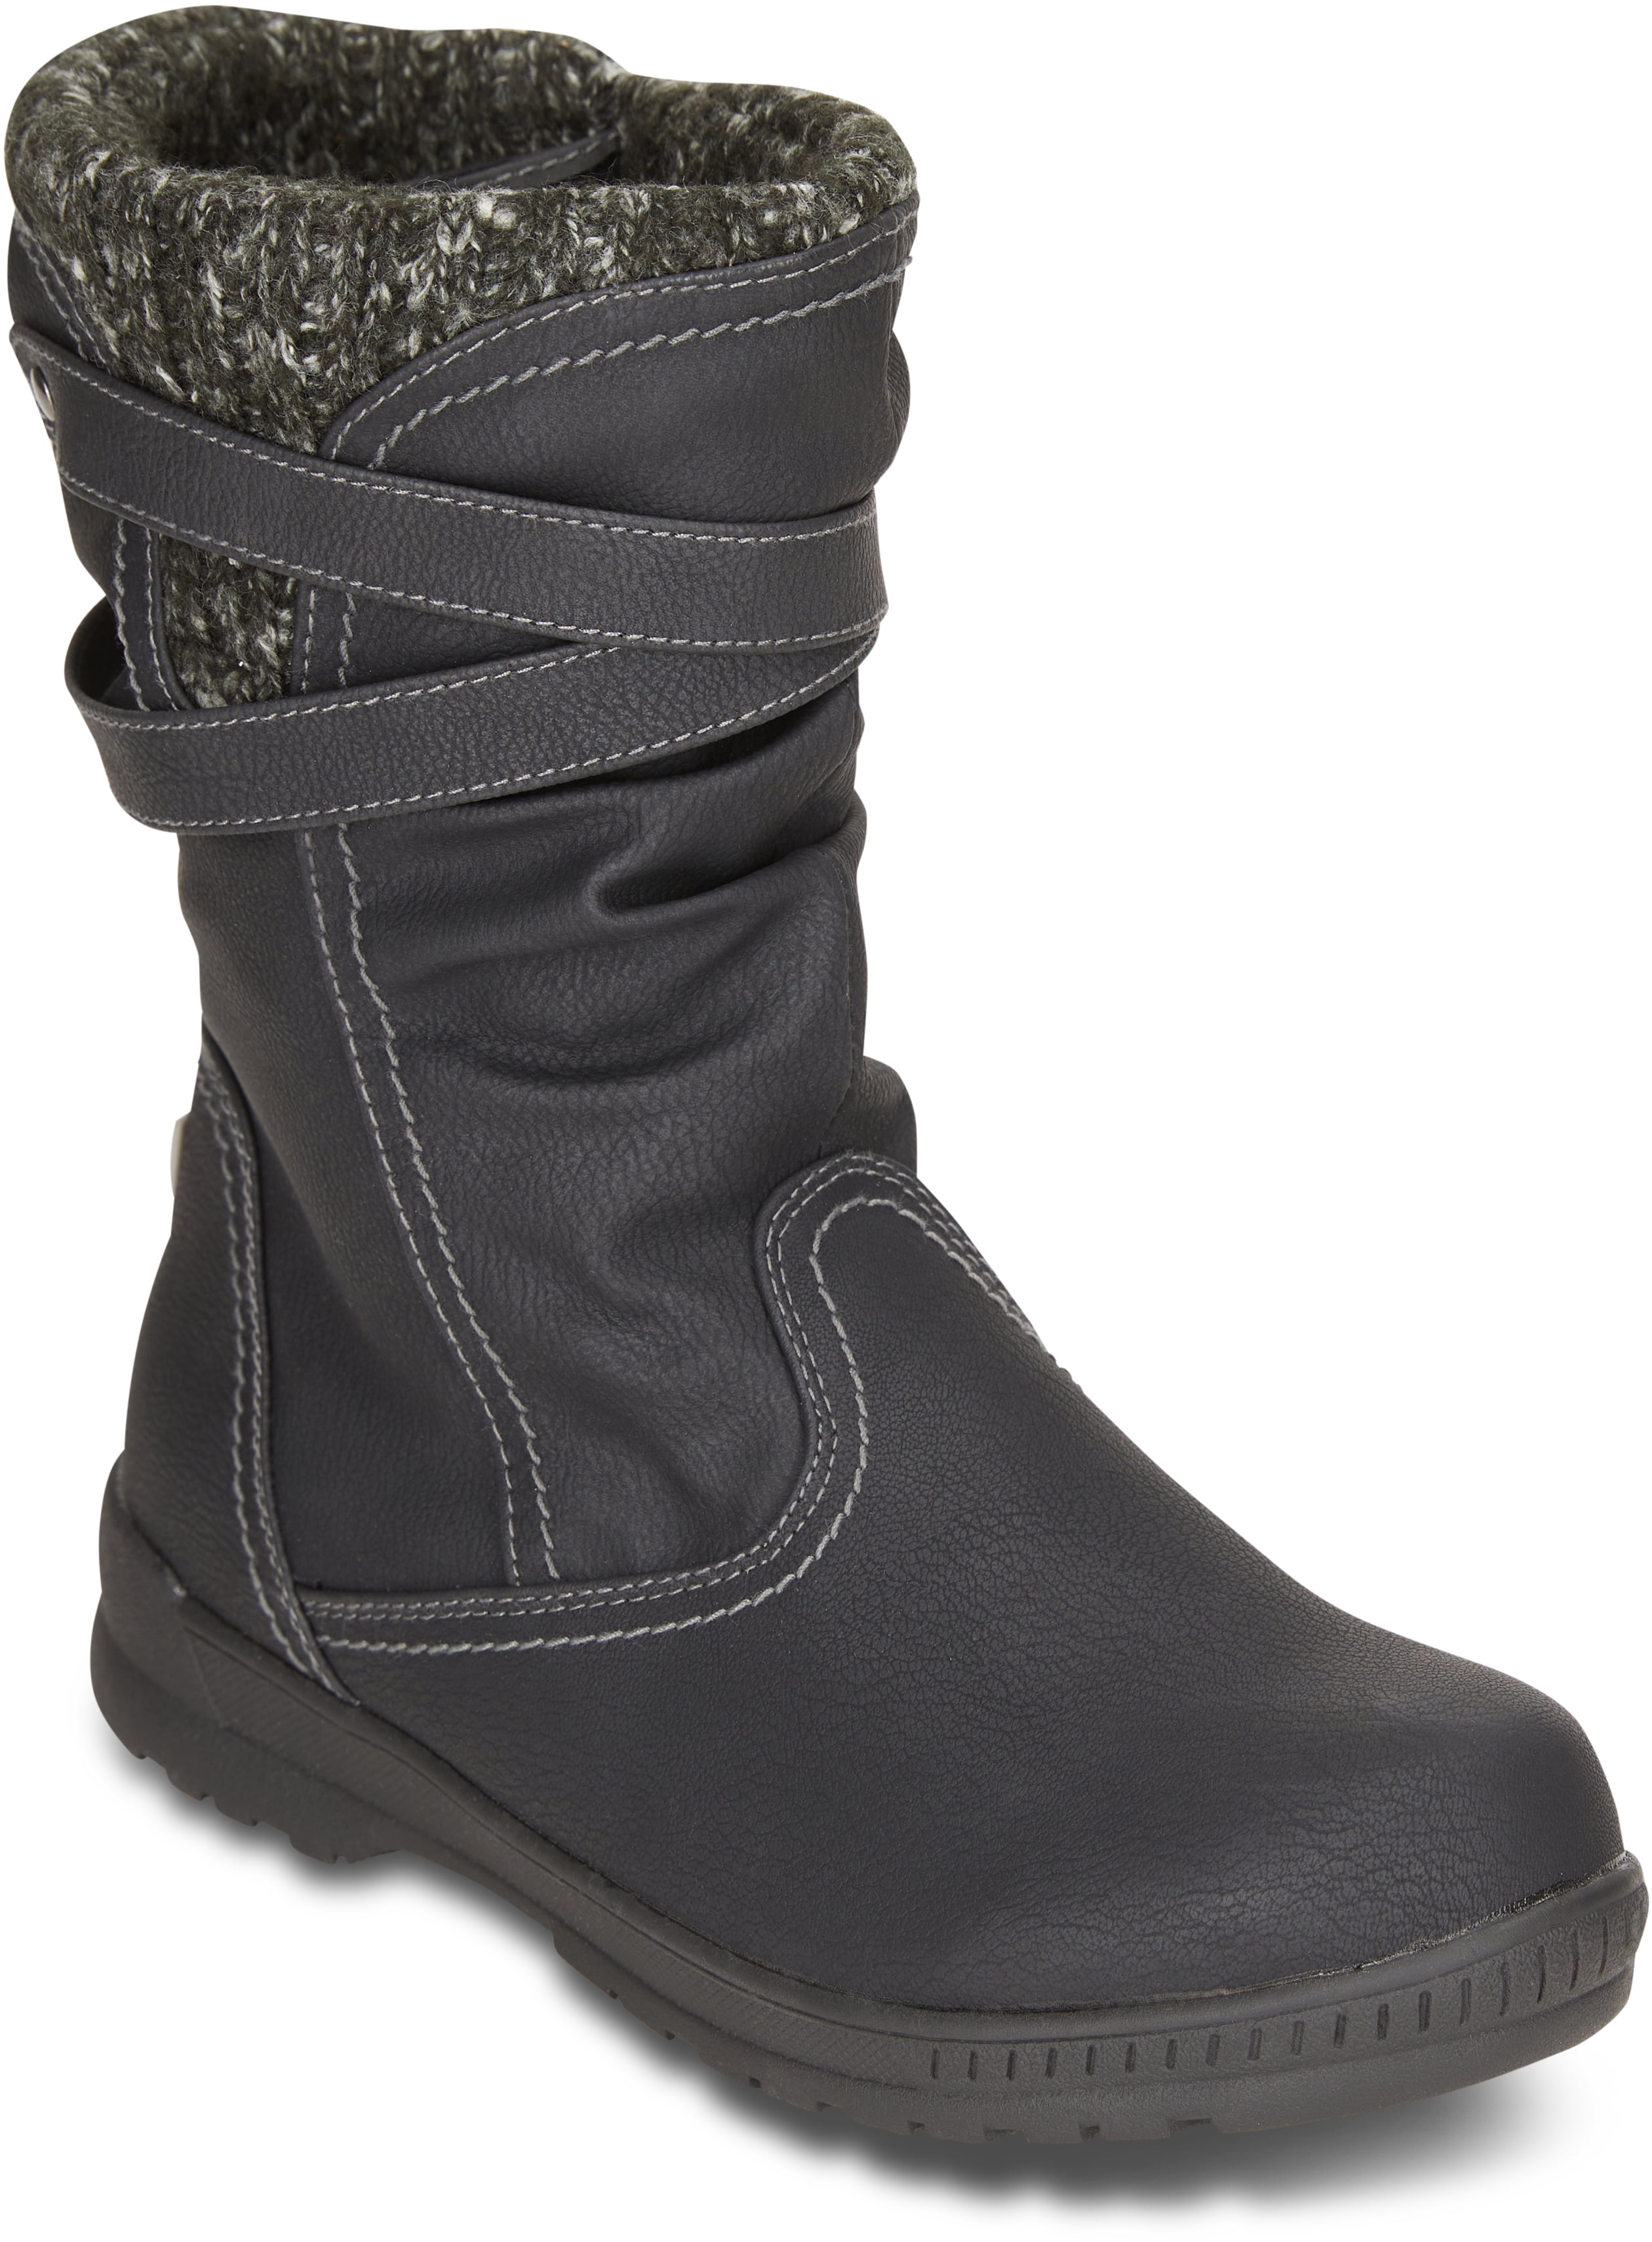 Available Both in Medium and Wide Keeps Feet Warm & Dry Khombu Womens Cold Weather Boots with Dual Zipper Closures Carly Waterproof Insulated Mid-Calf Winter Boots for Comfort 